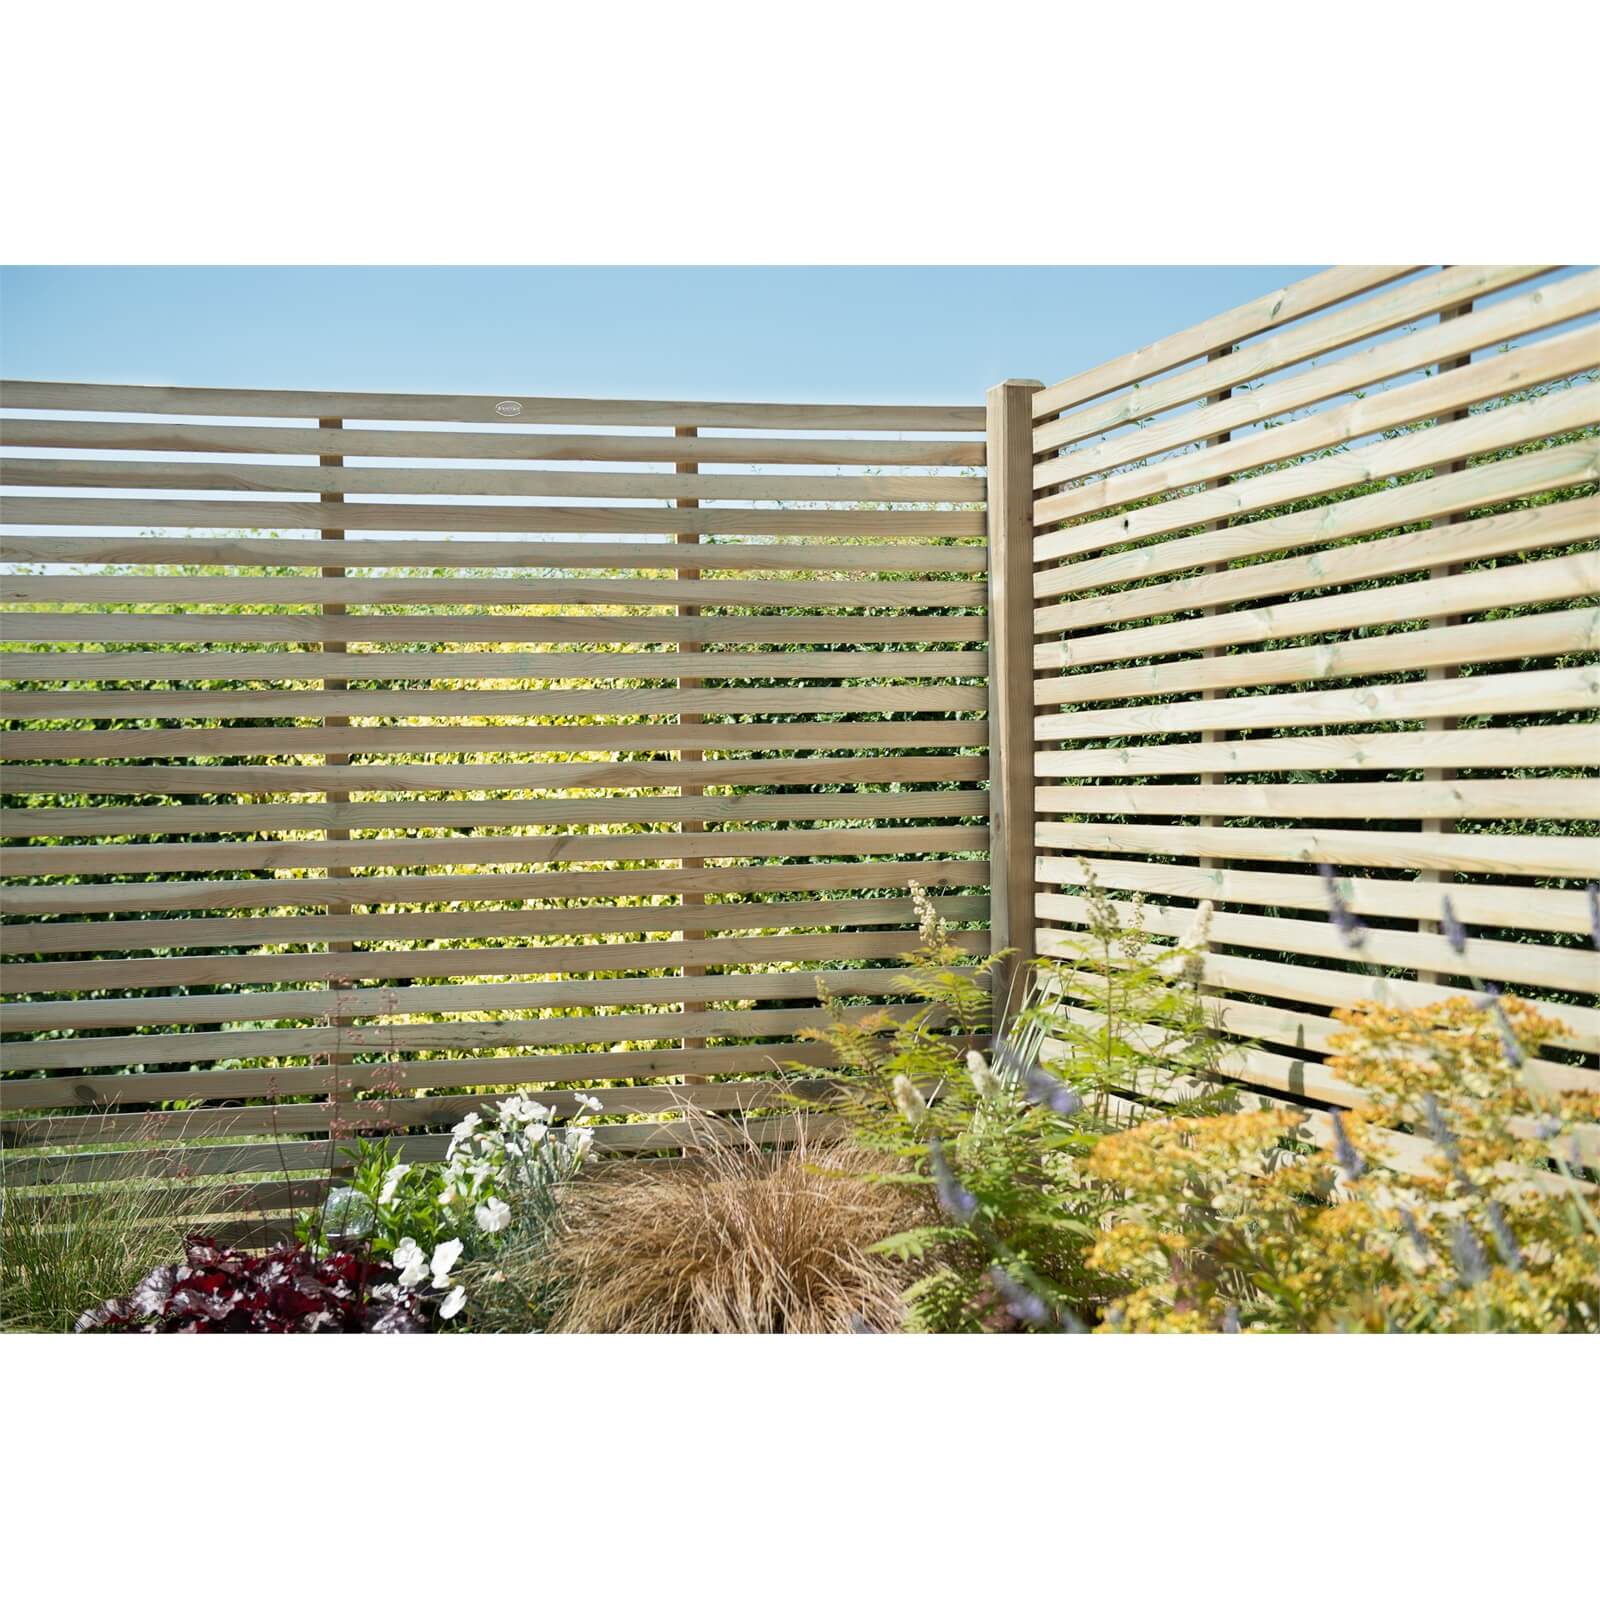 6ft x 5ft (1.8m x 1.5m) Pressure Treated Contemporary Slatted Fence Panel - Pack of 5